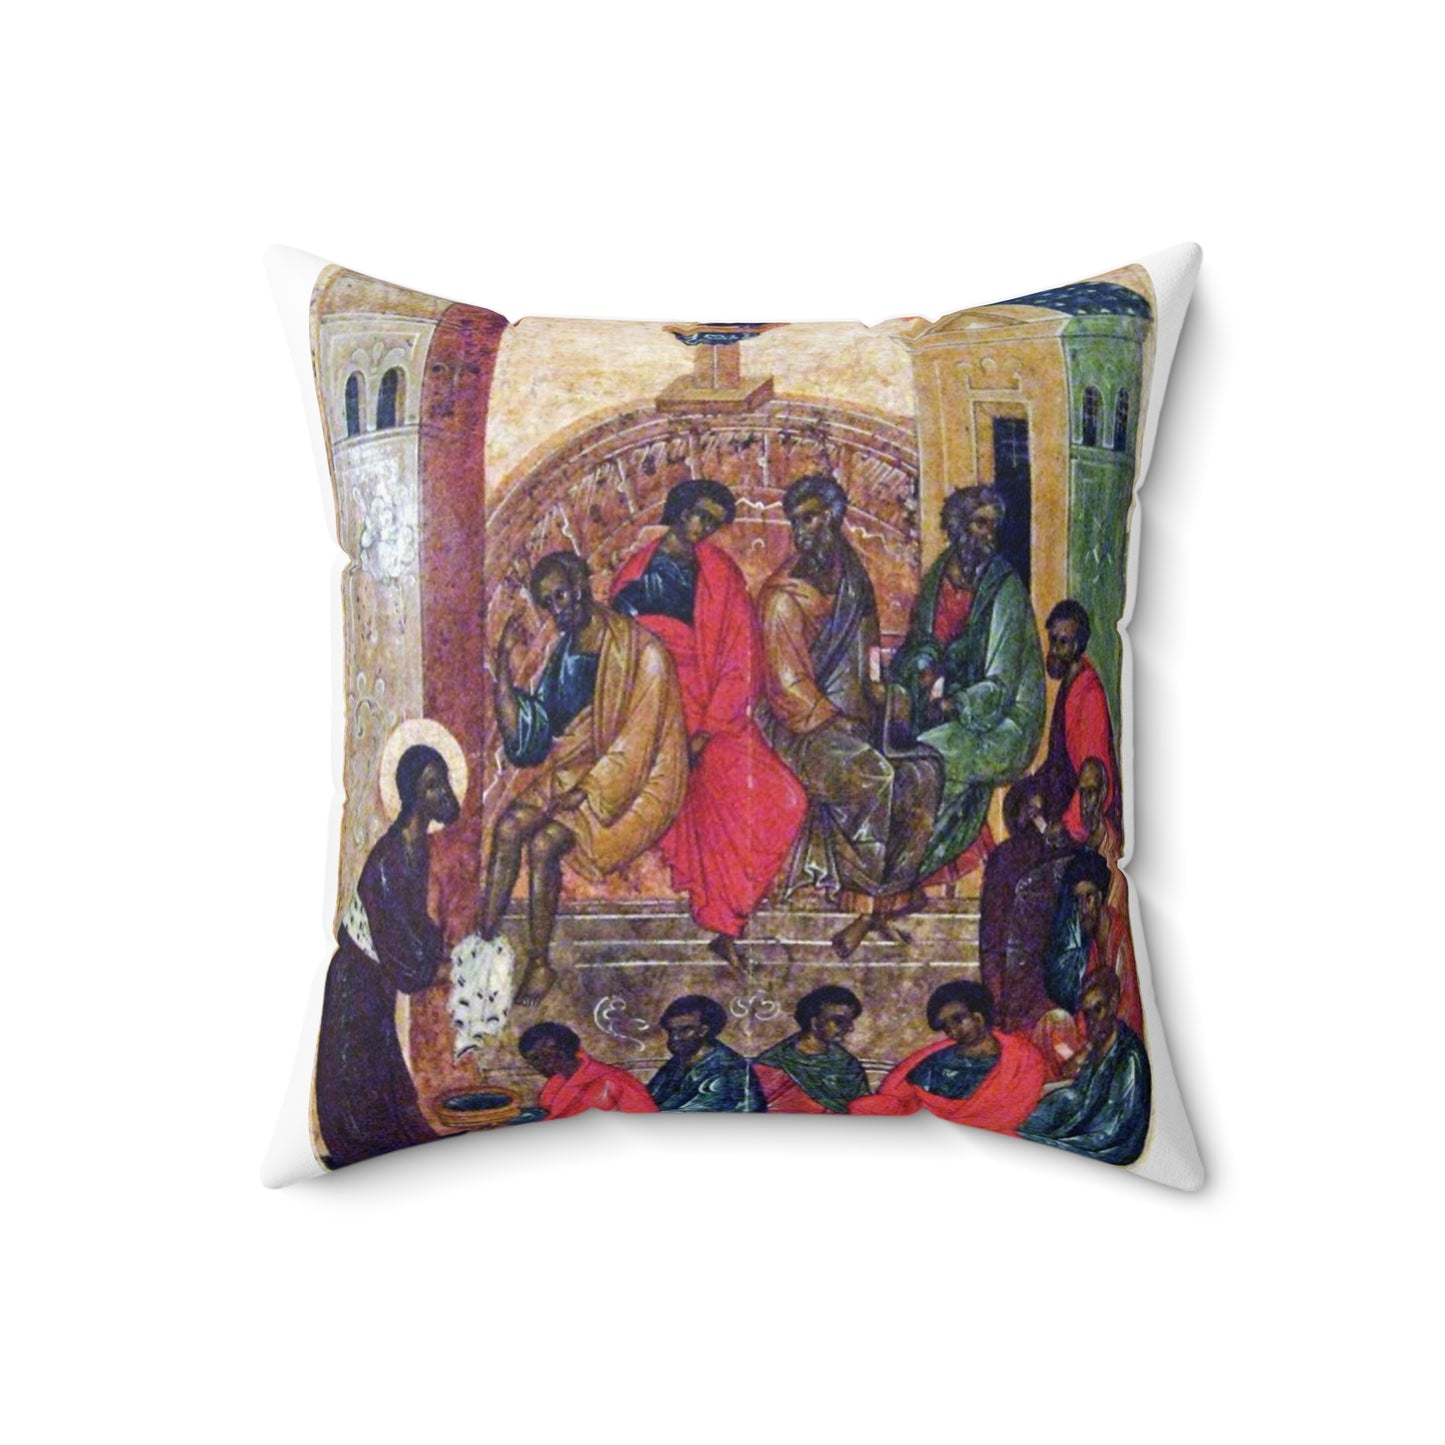 Jesus Washes Feet Of Disciples-Square Pillow